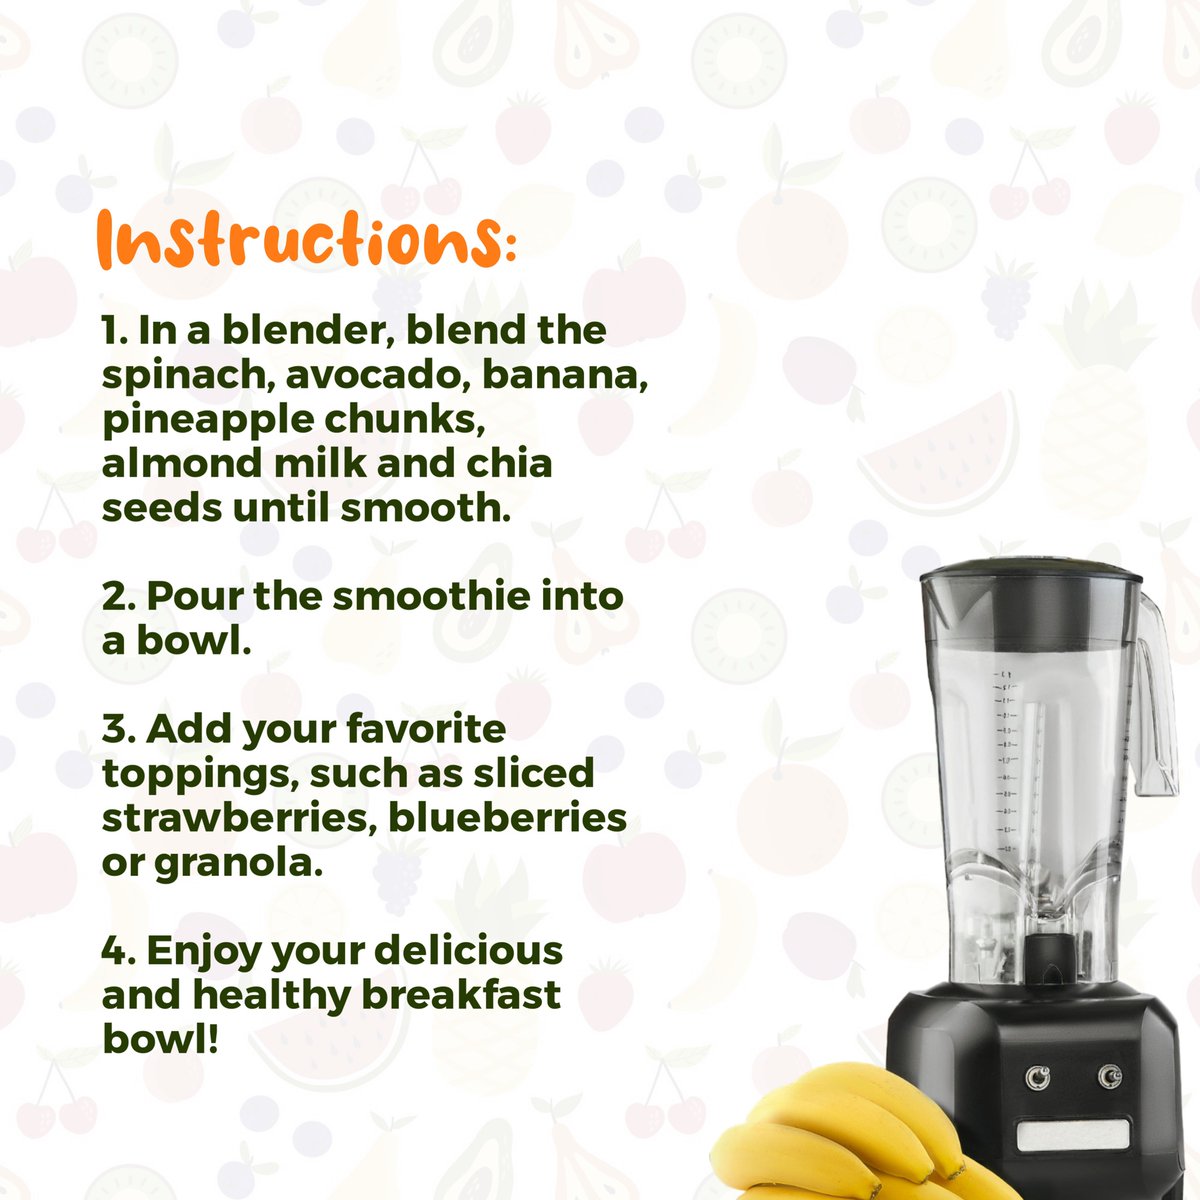 Rise and shine! 

Start your day with a healthy breakfast packed with fresh fruits and veggies. 

Here is one tasty recipe to try out and fuel your morning!

#Ubi #smoothierecipe #healthydietfood #healthymindbody #breakfastbowl #greenfood #tropicalfruit #fruitlover